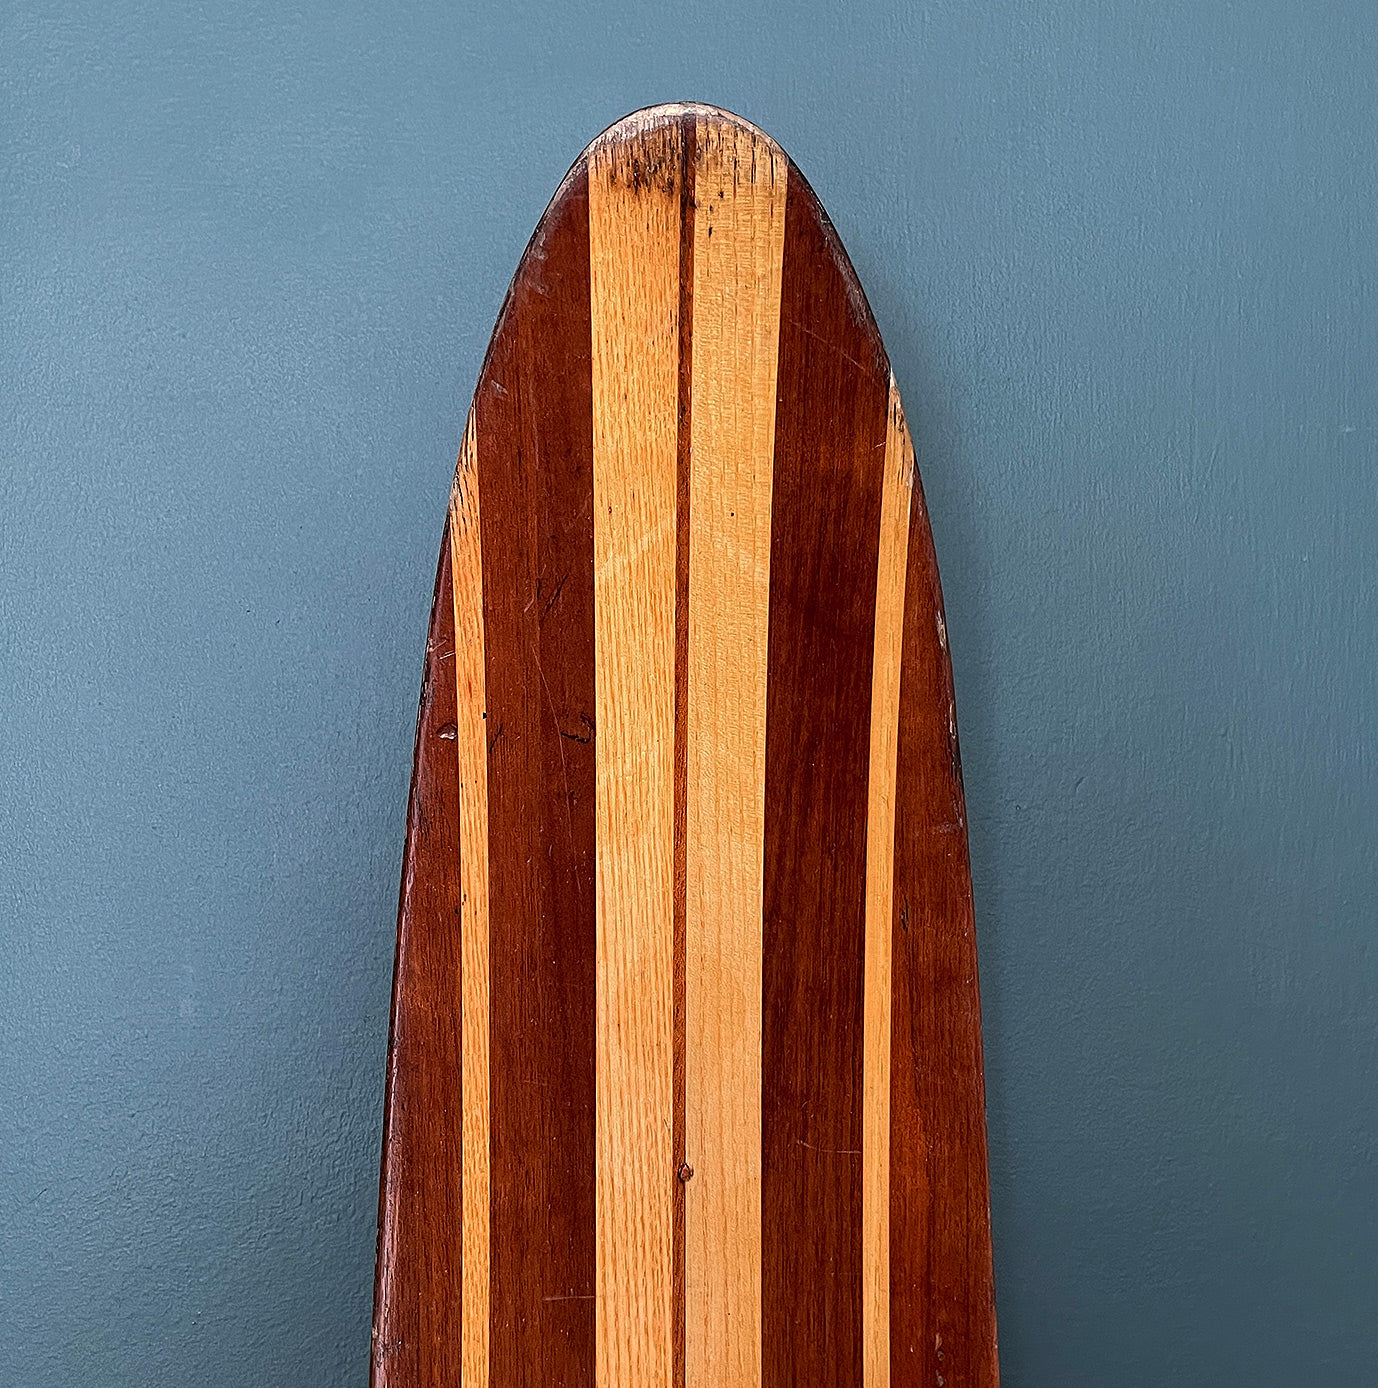 Uber cool vintage wooden mono water ski. It has a wonderful warm tone to the two tone wood. We have removed the old rubber footholds and given it a polish so that it can be seen in its full glory when mounted on the wall - SHOP NOW - www.intovintage.co.uk